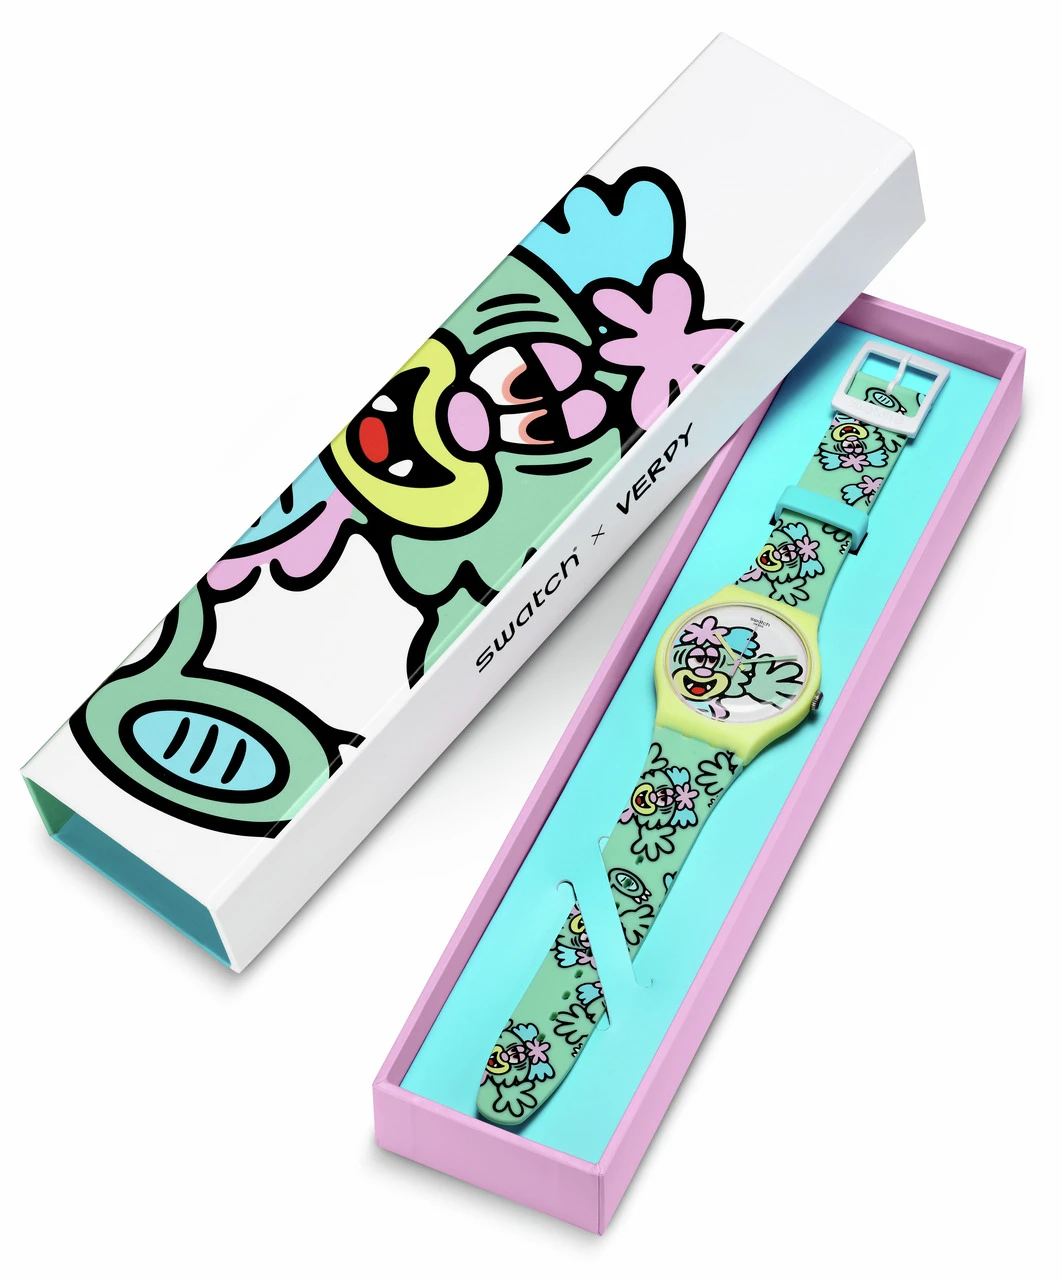 An image of a swatch x kidrobot watch in a colorful, artistically designed box. the watch features a whimsical, cartoonish pattern with vibrant colors such as blue, pink, and yellow.